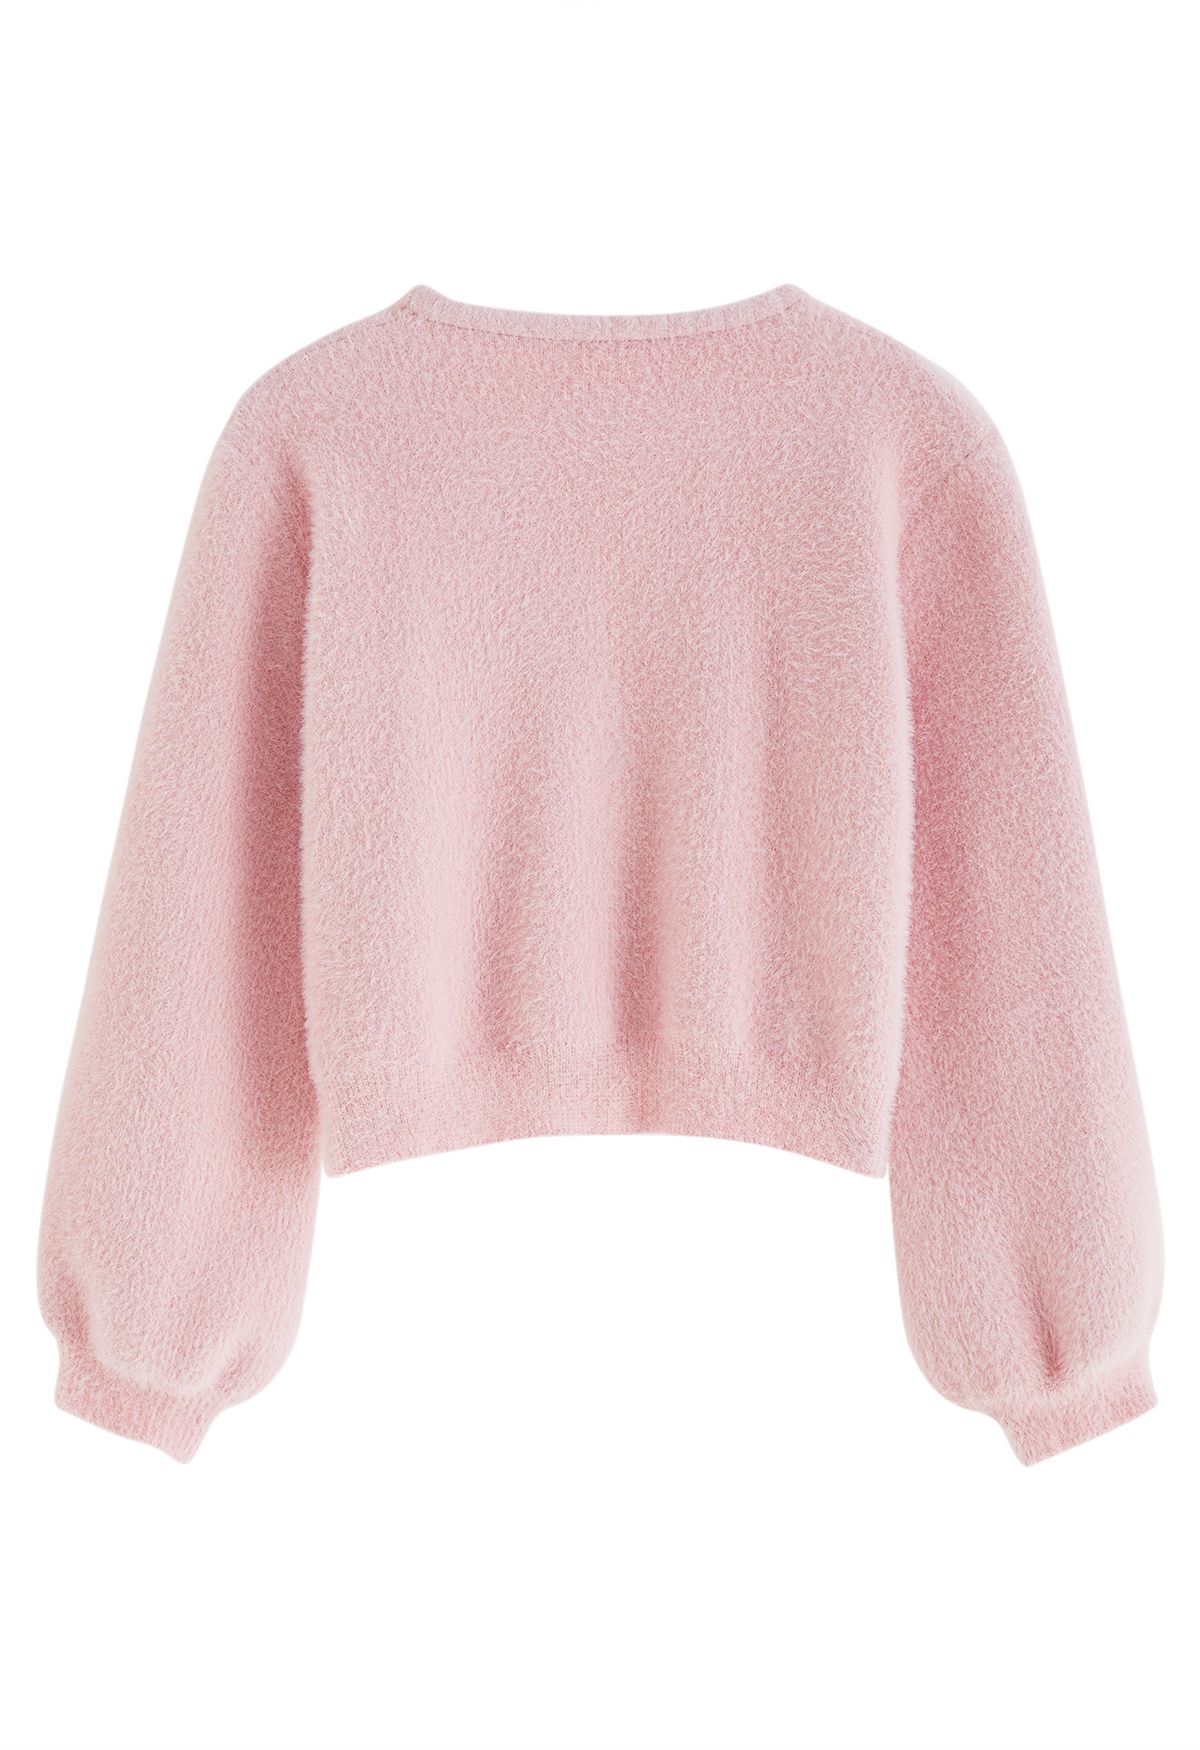 Heart-Shape Button Fuzzy Crop Cardigan in Pink - Retro, Indie and ...